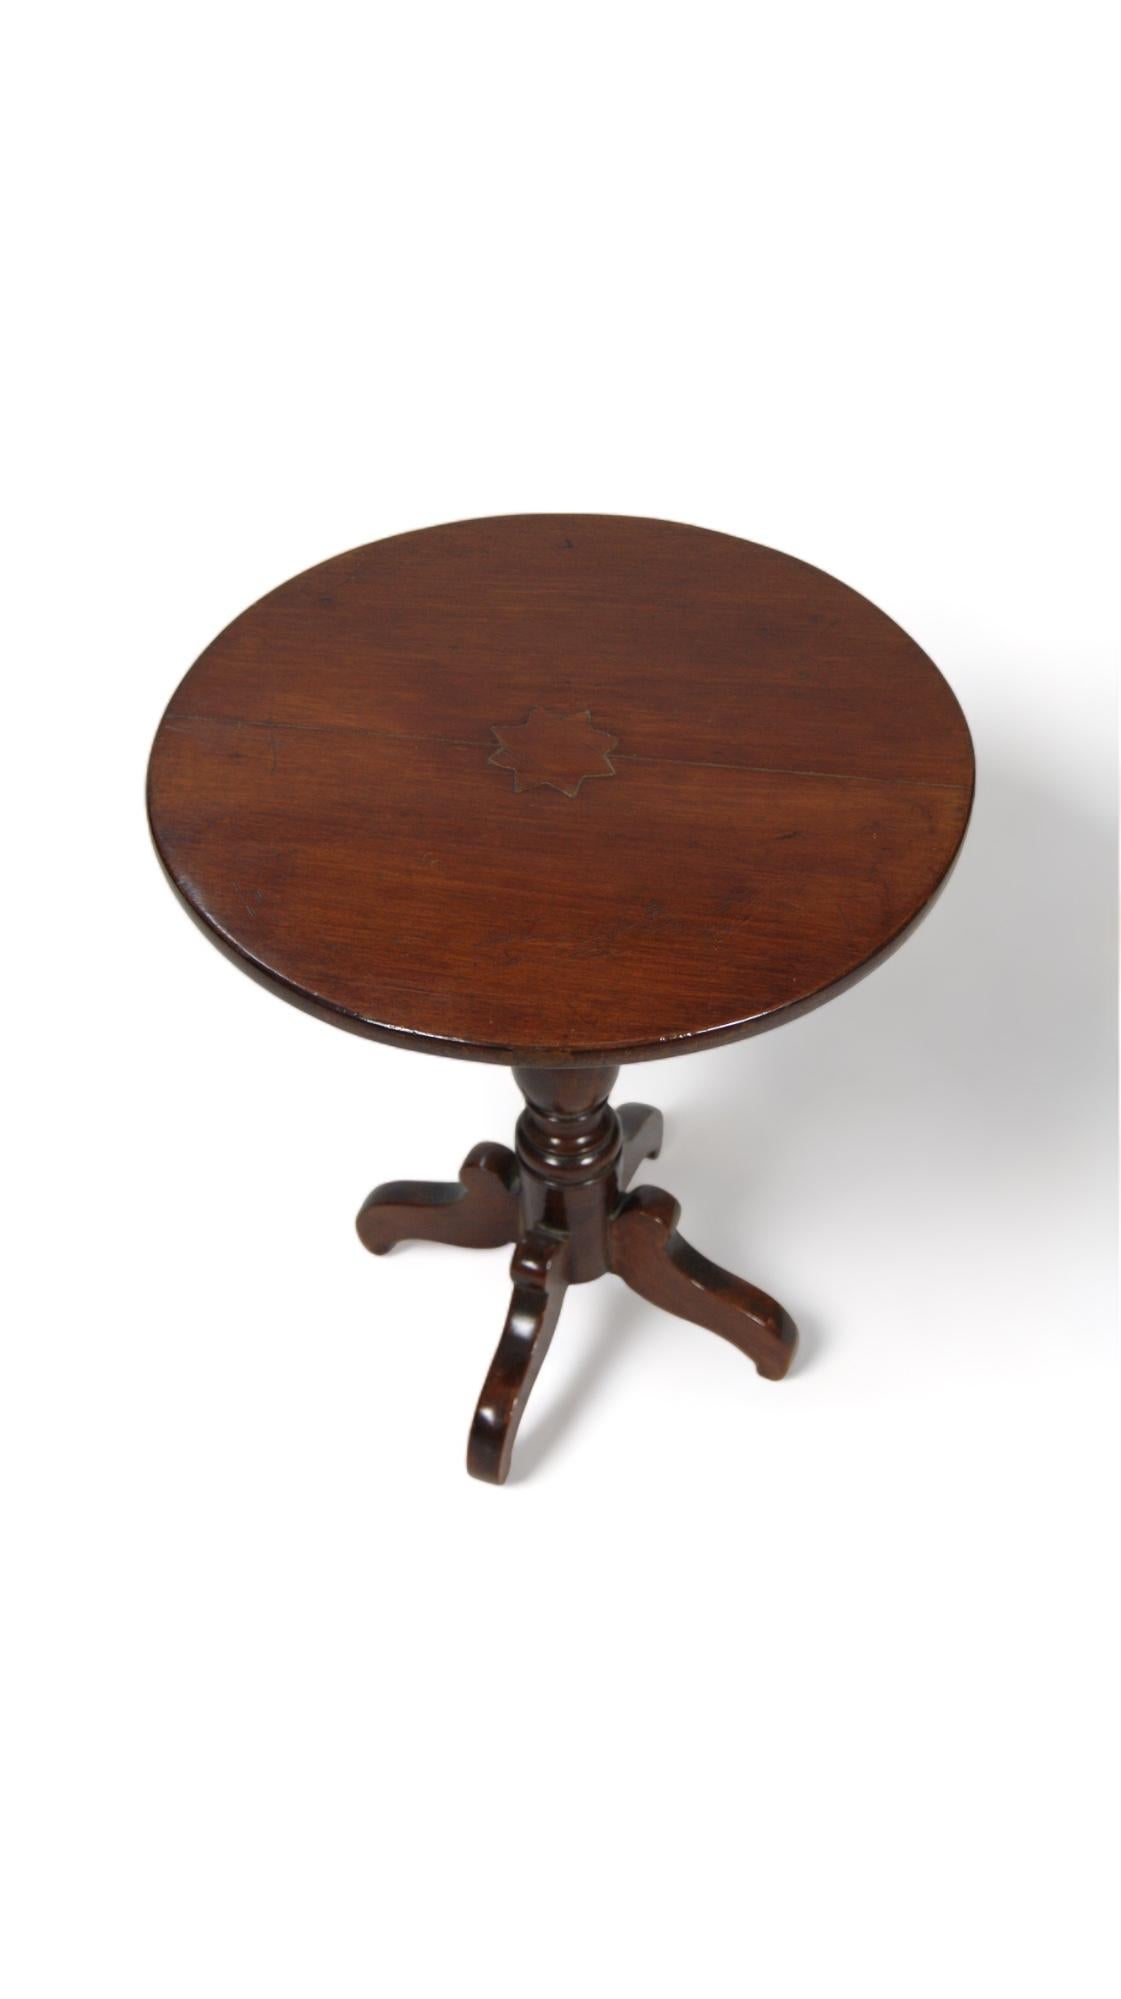 The vintage mahogany side table with tripod base is a timeless work of art that evokes the elegance and charm of bygone eras. With its exquisite craftsmanship and distinctive design, this piece stands out like a jewel in any space.

Mahogany, with